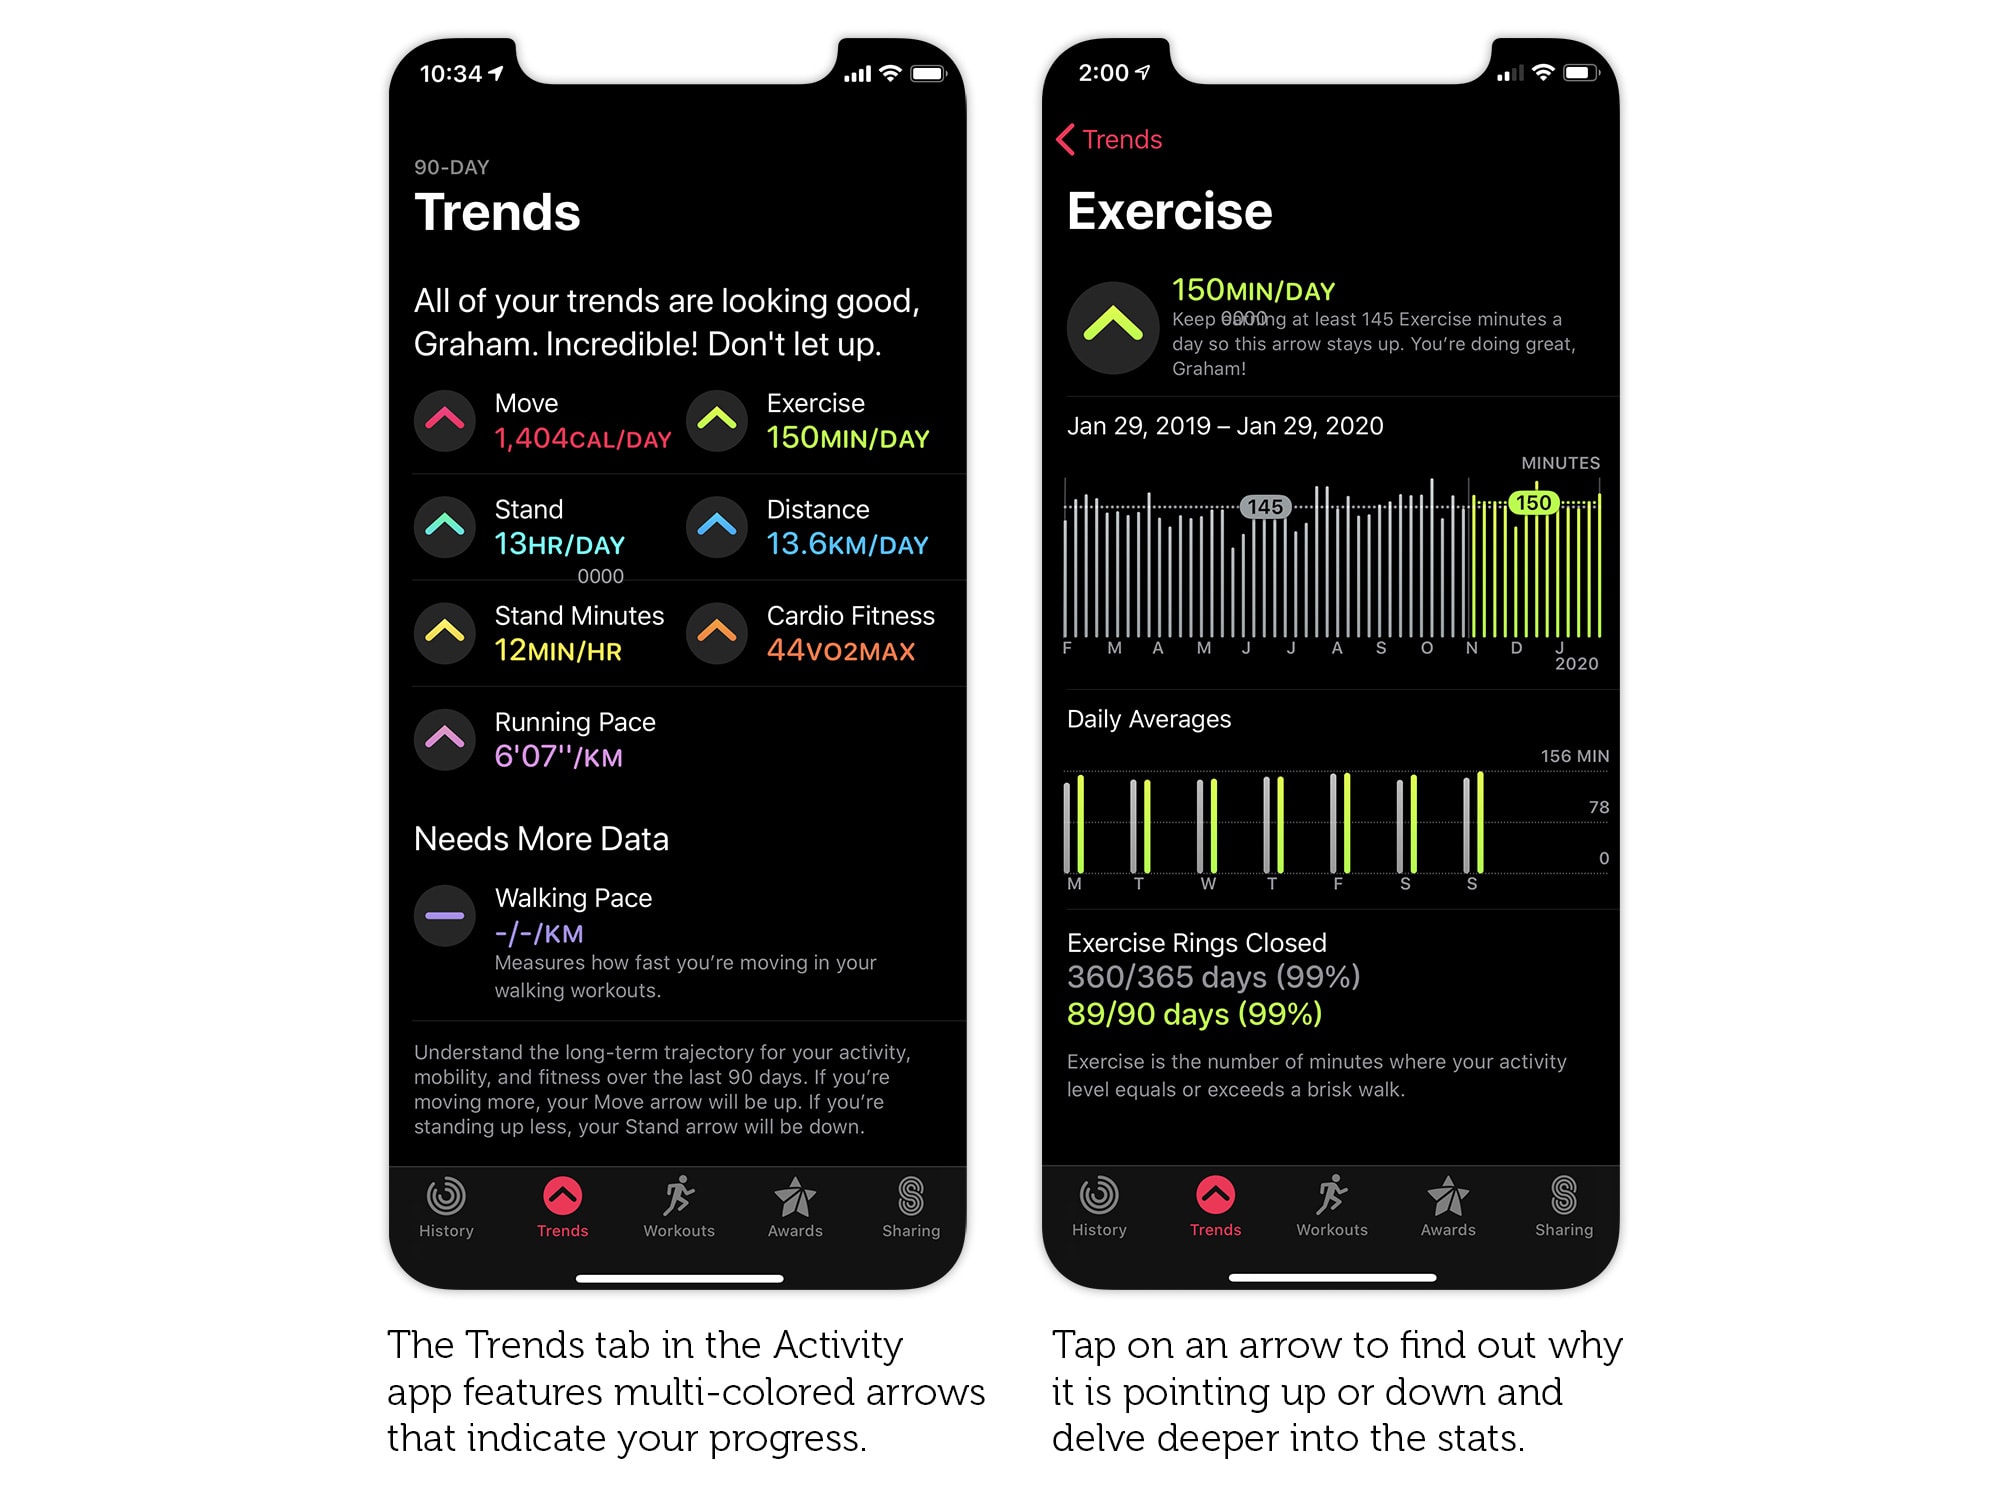 With Apple Watch Activity Trends, you can monitor the ups and downs of your fitness pursuits.